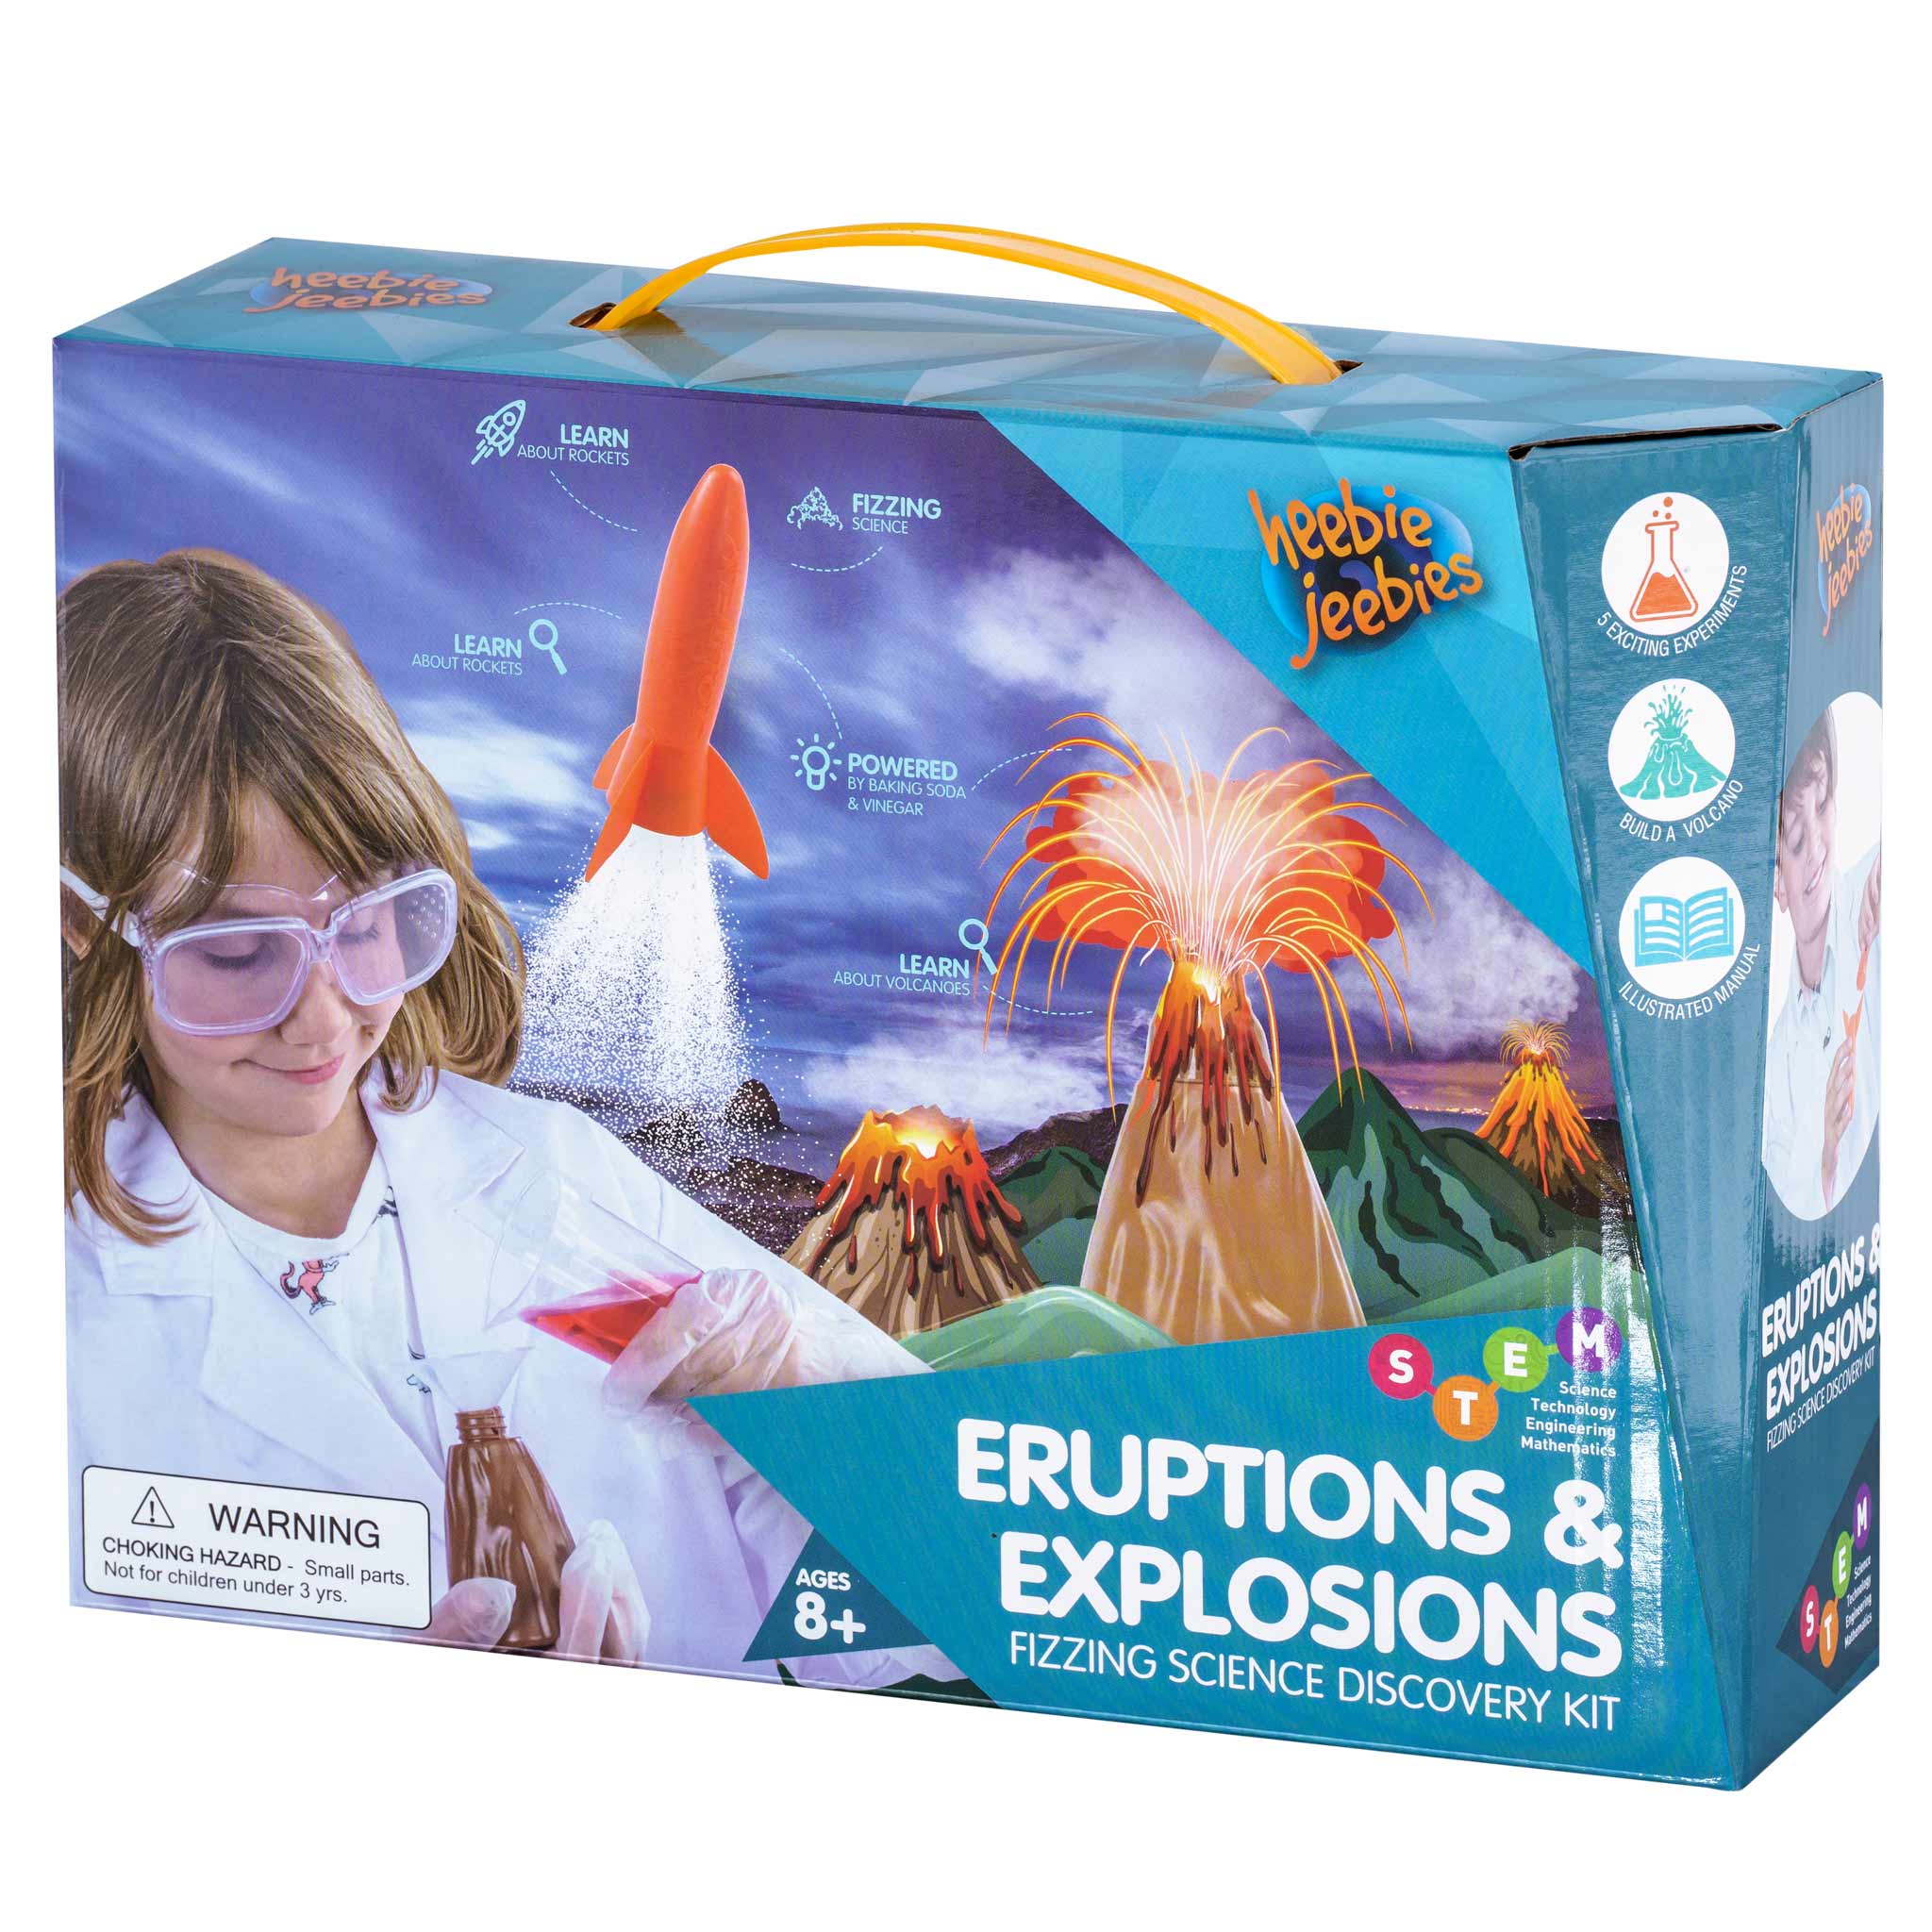 HJ-4206-Eruptions-and-explosions-box-1.jpg